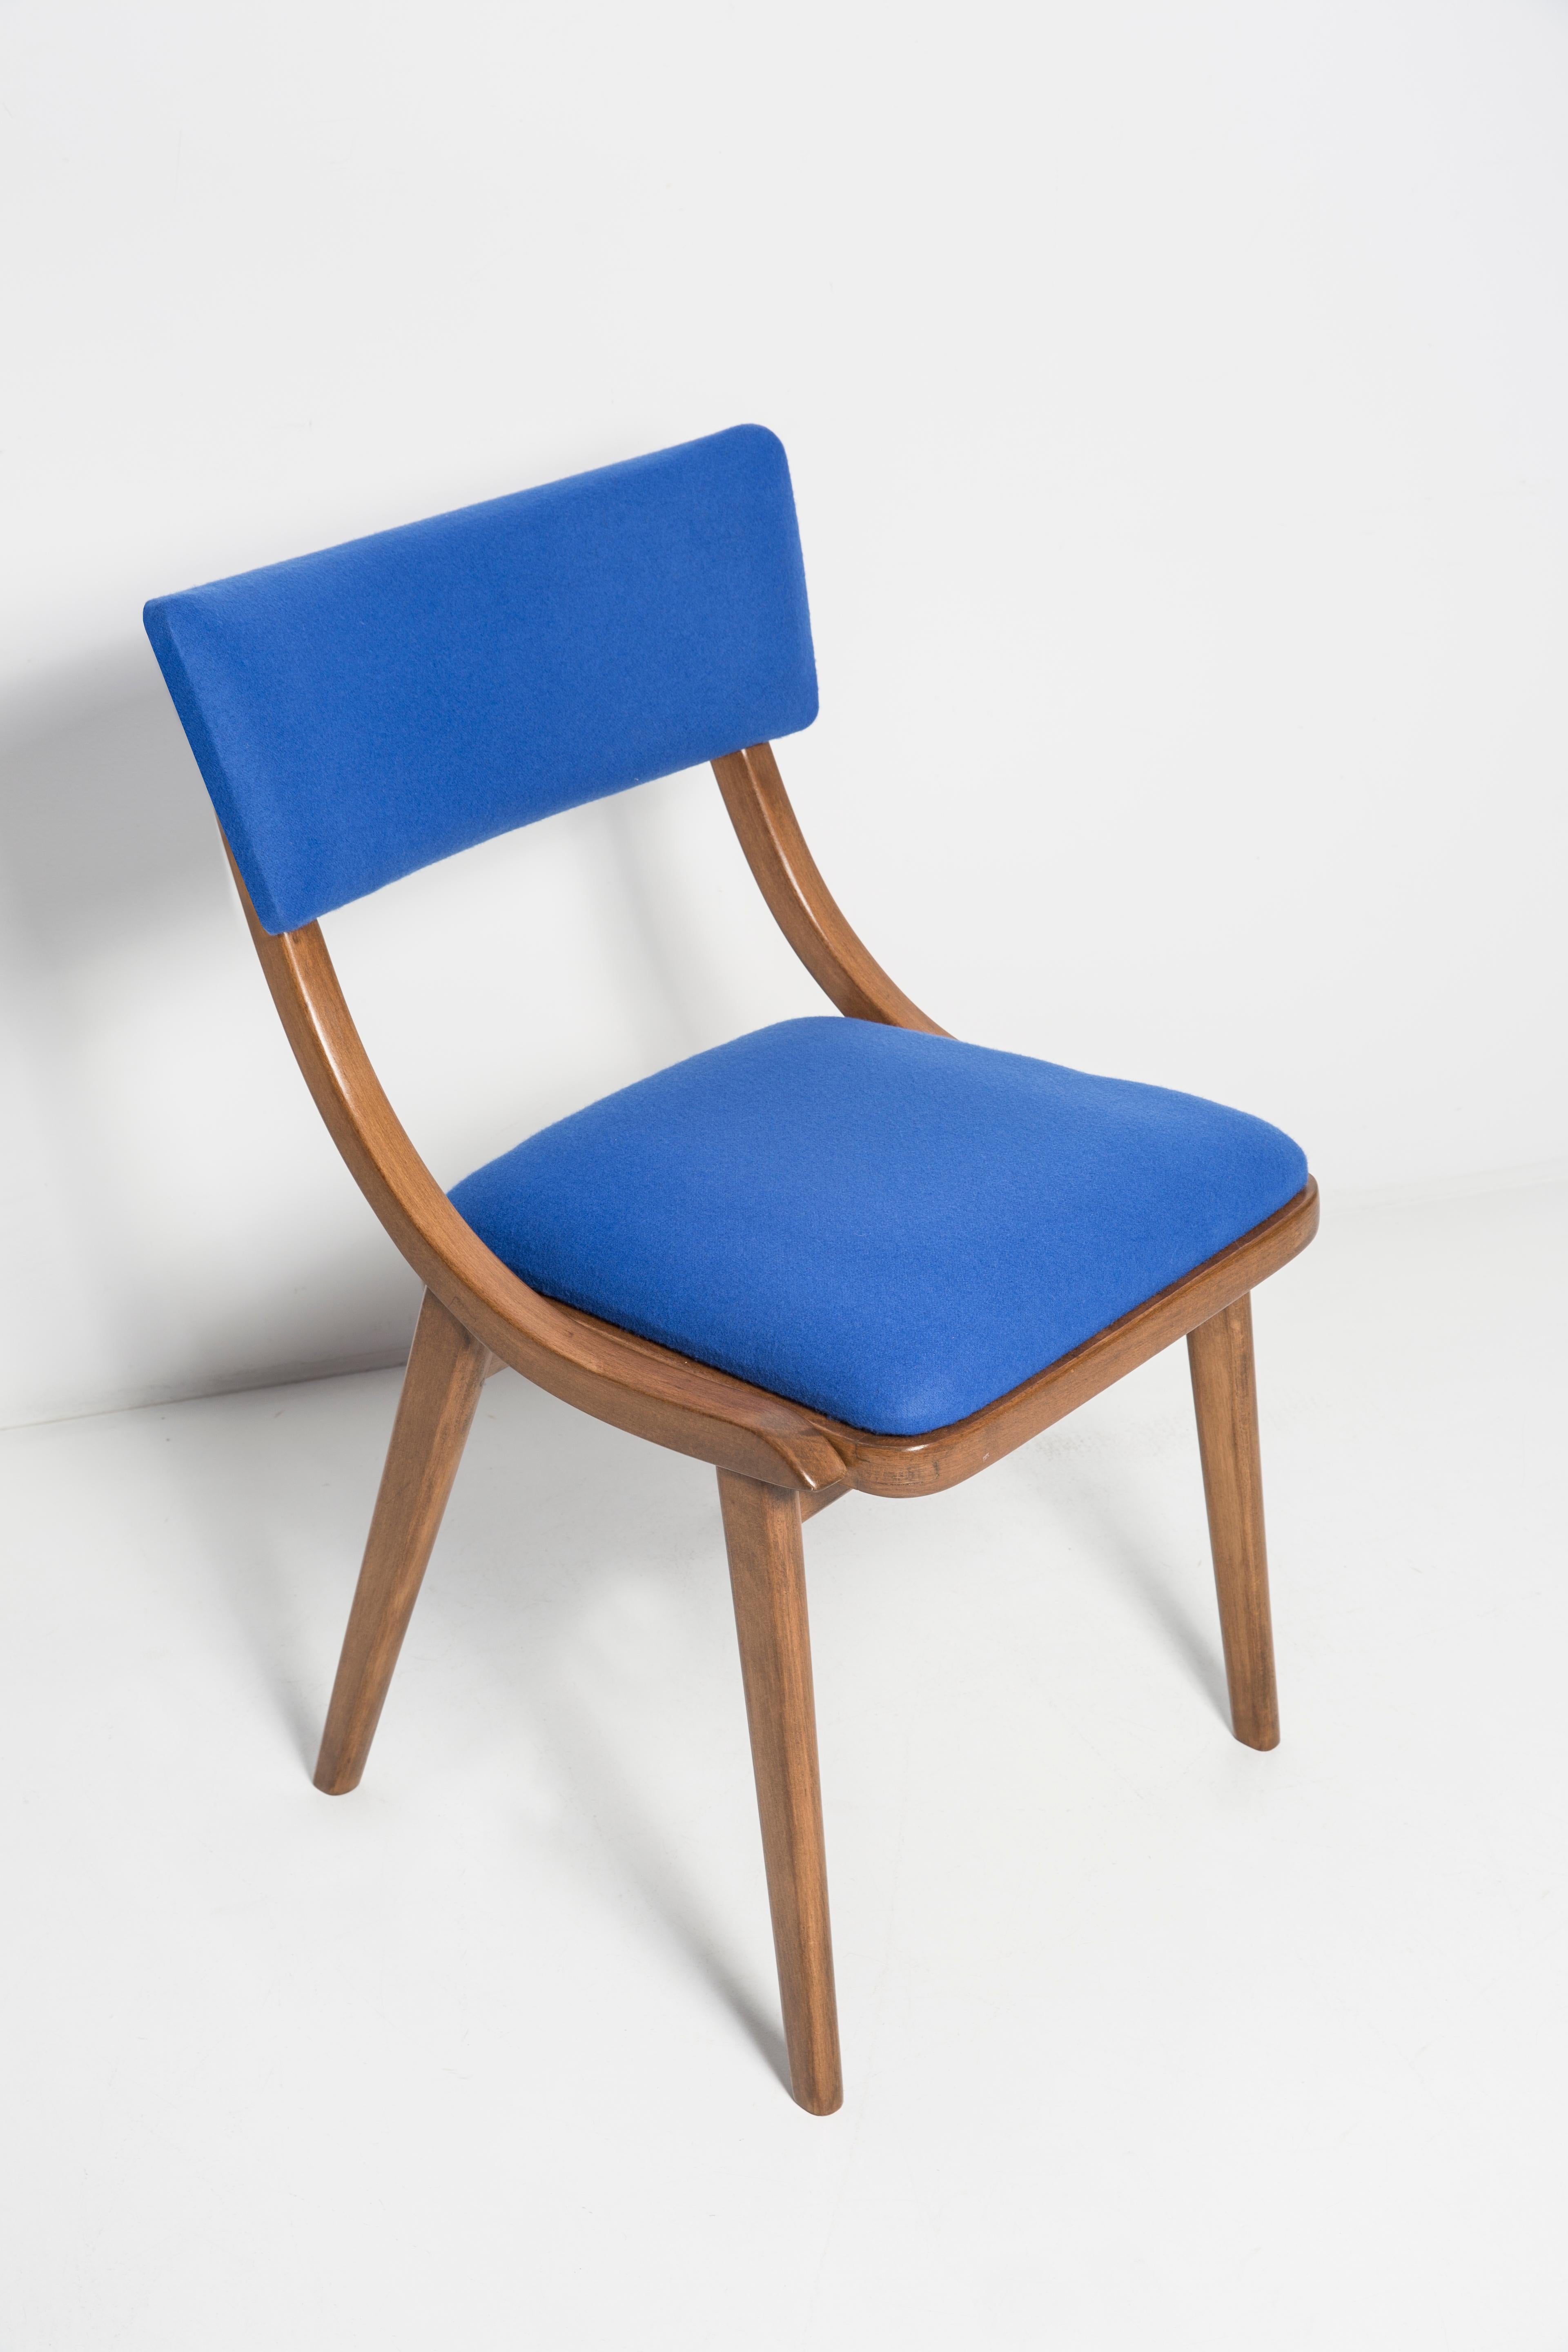 The “Bumerang Chair” is a characteristic piece of furniture from the Polish People’s Republic (PRL) era. Its name comes from the distinctive shape of the backrest, resembling a boomerang. The chair was often made from wood or wood-like materials,